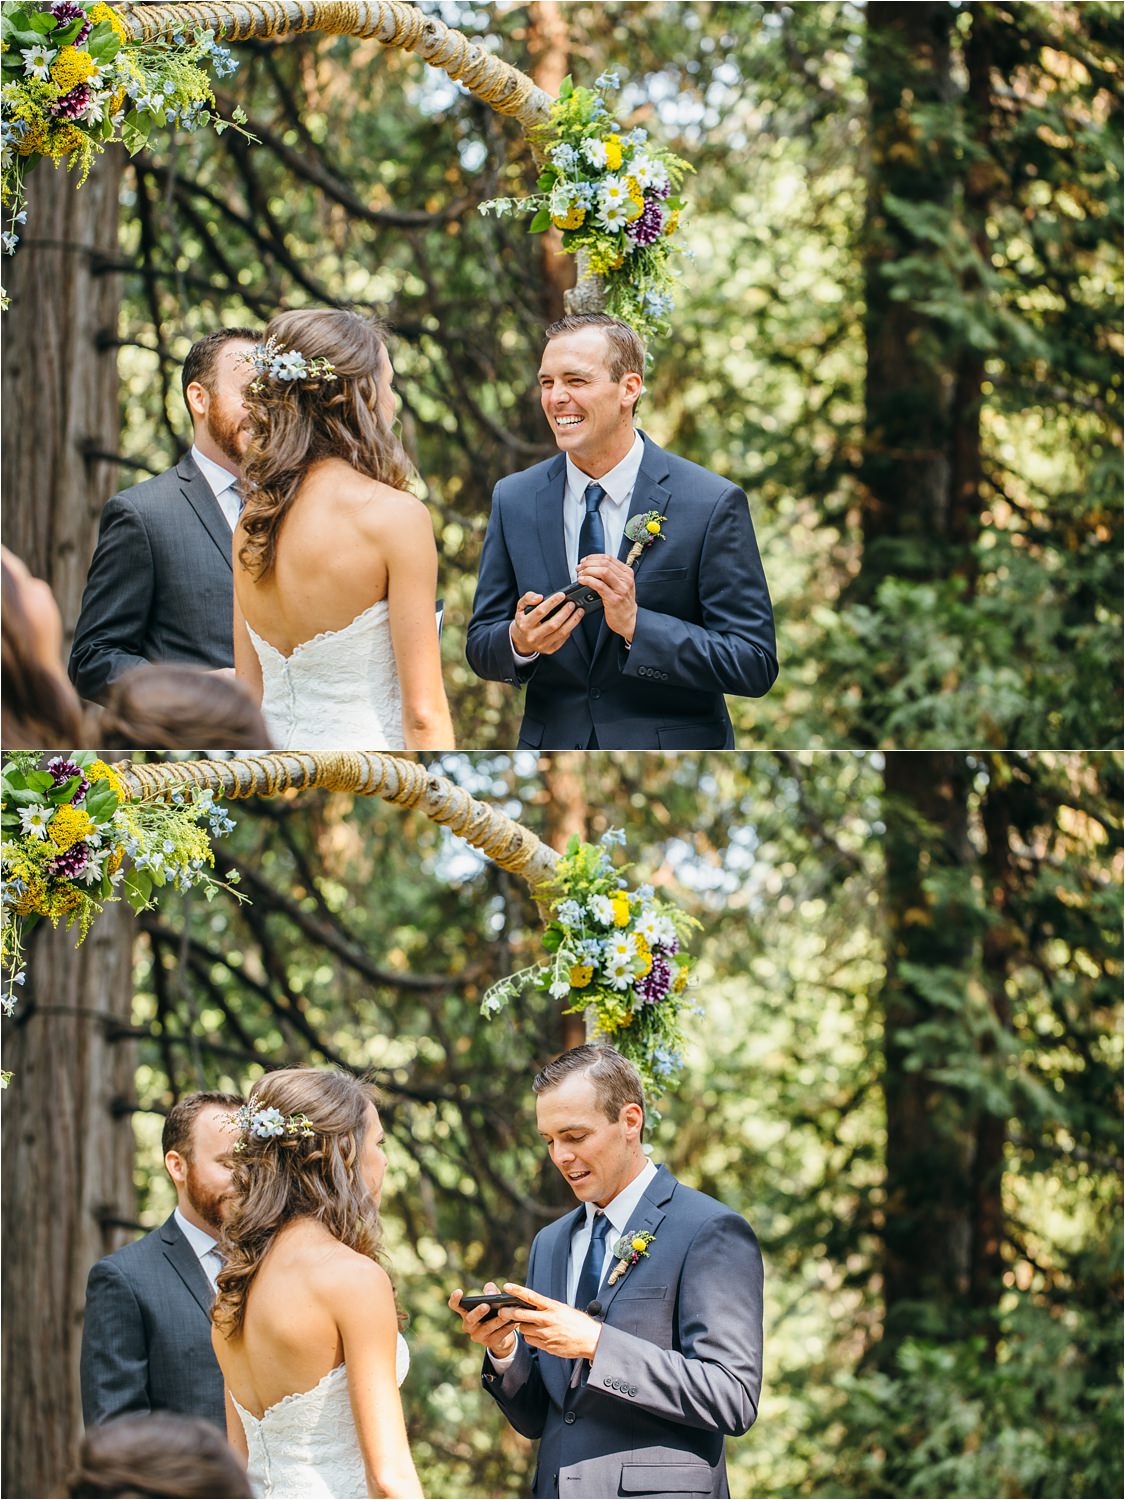 Vows during Wedding Ceremony - Mountain Wedding Ceremony - Summer Camp Themed Wedding in Lake Arrowhead, CA - https://brittneyhannonphotography.com